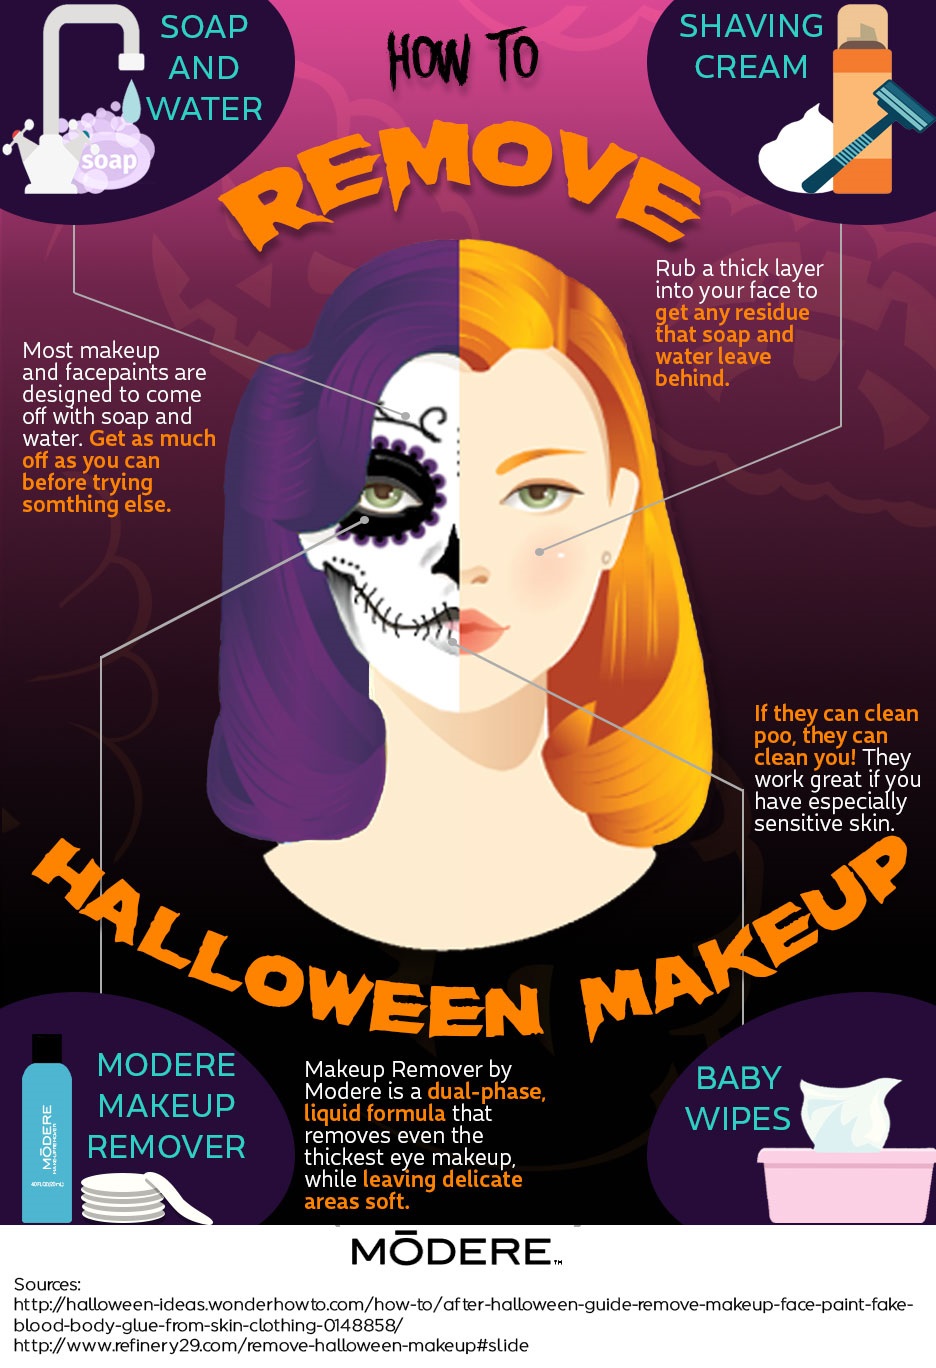 How to remove Halloween make-up